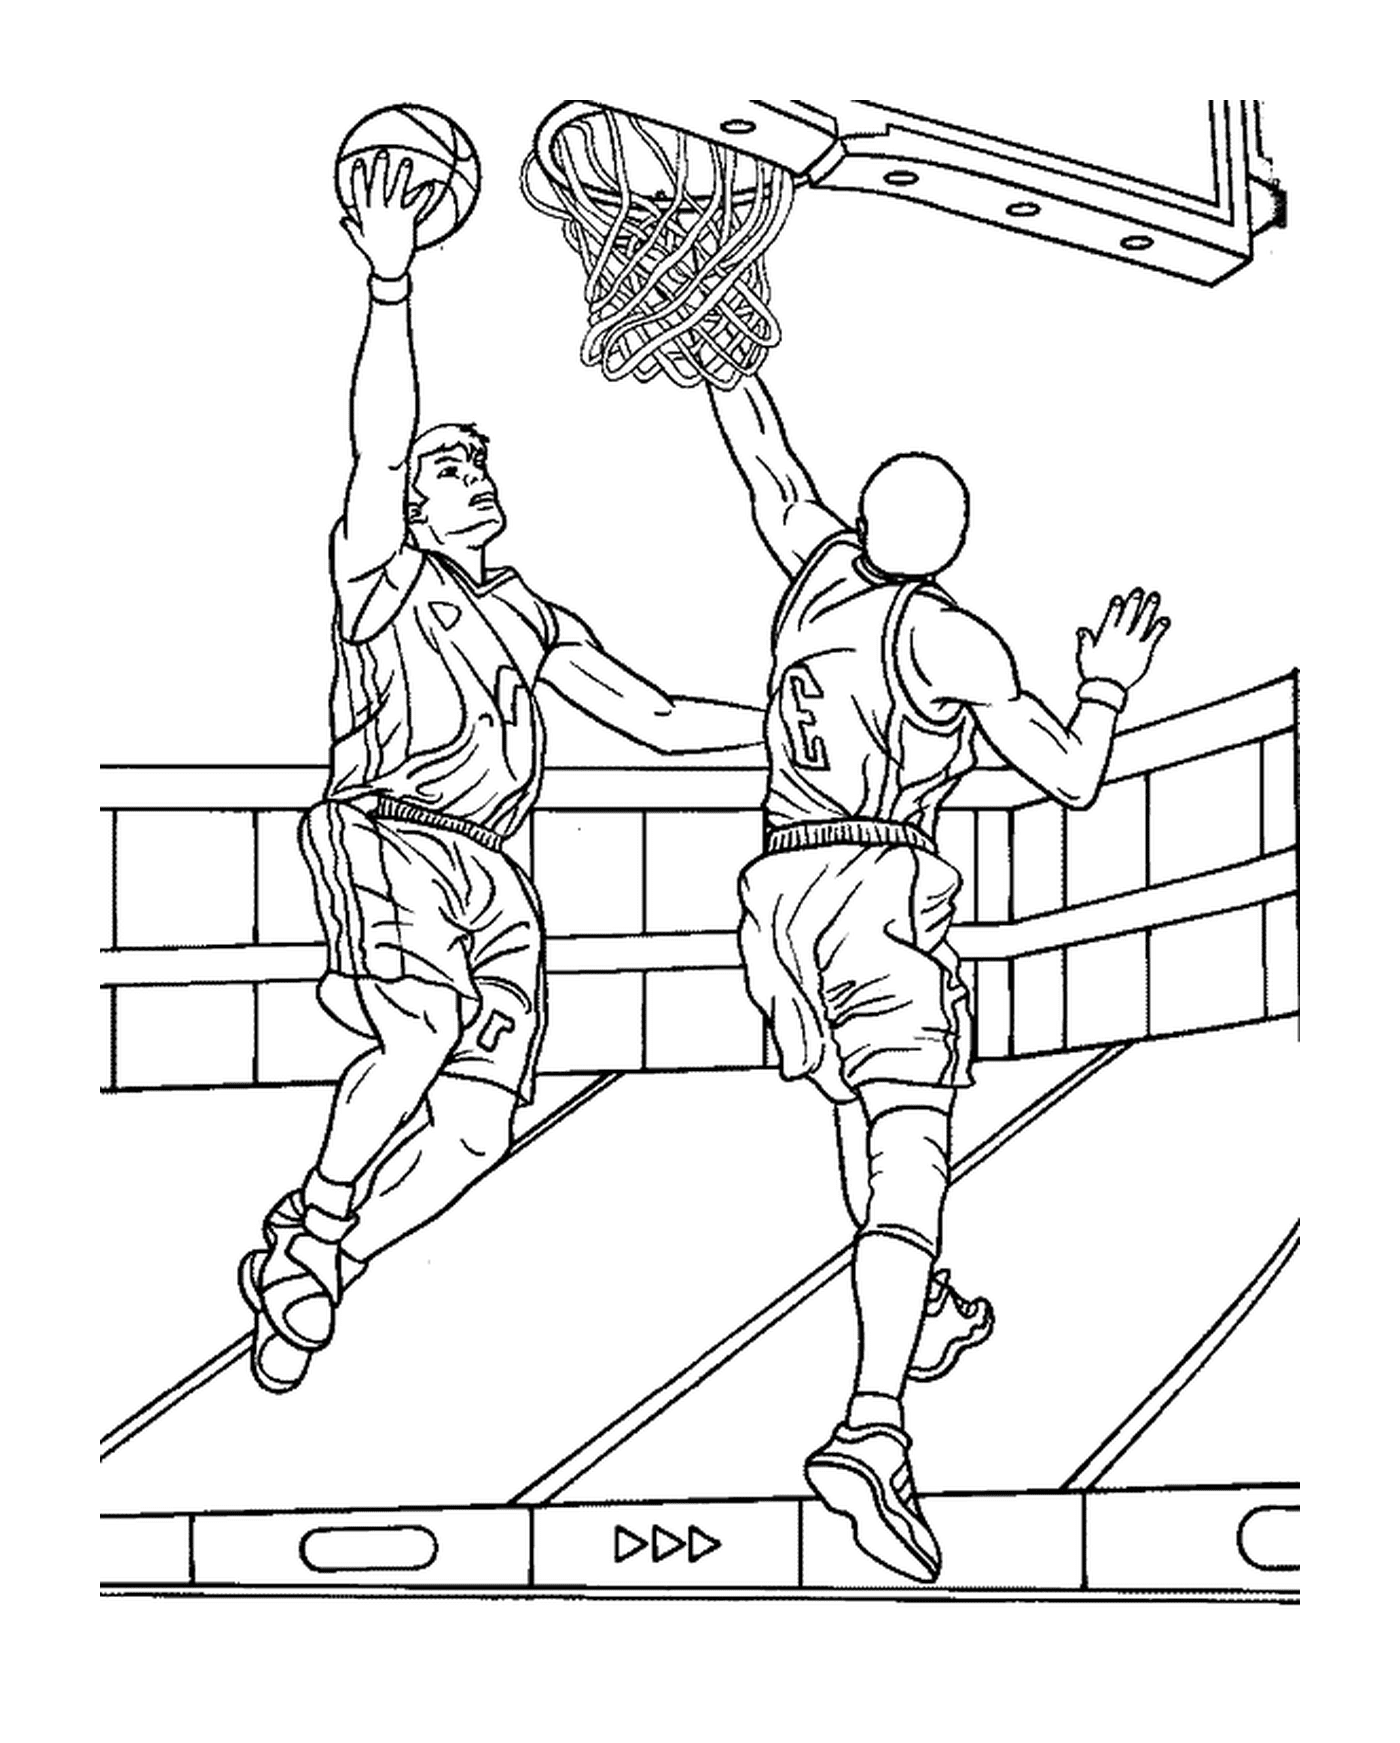  The basketball player will score a basket despite the defender 